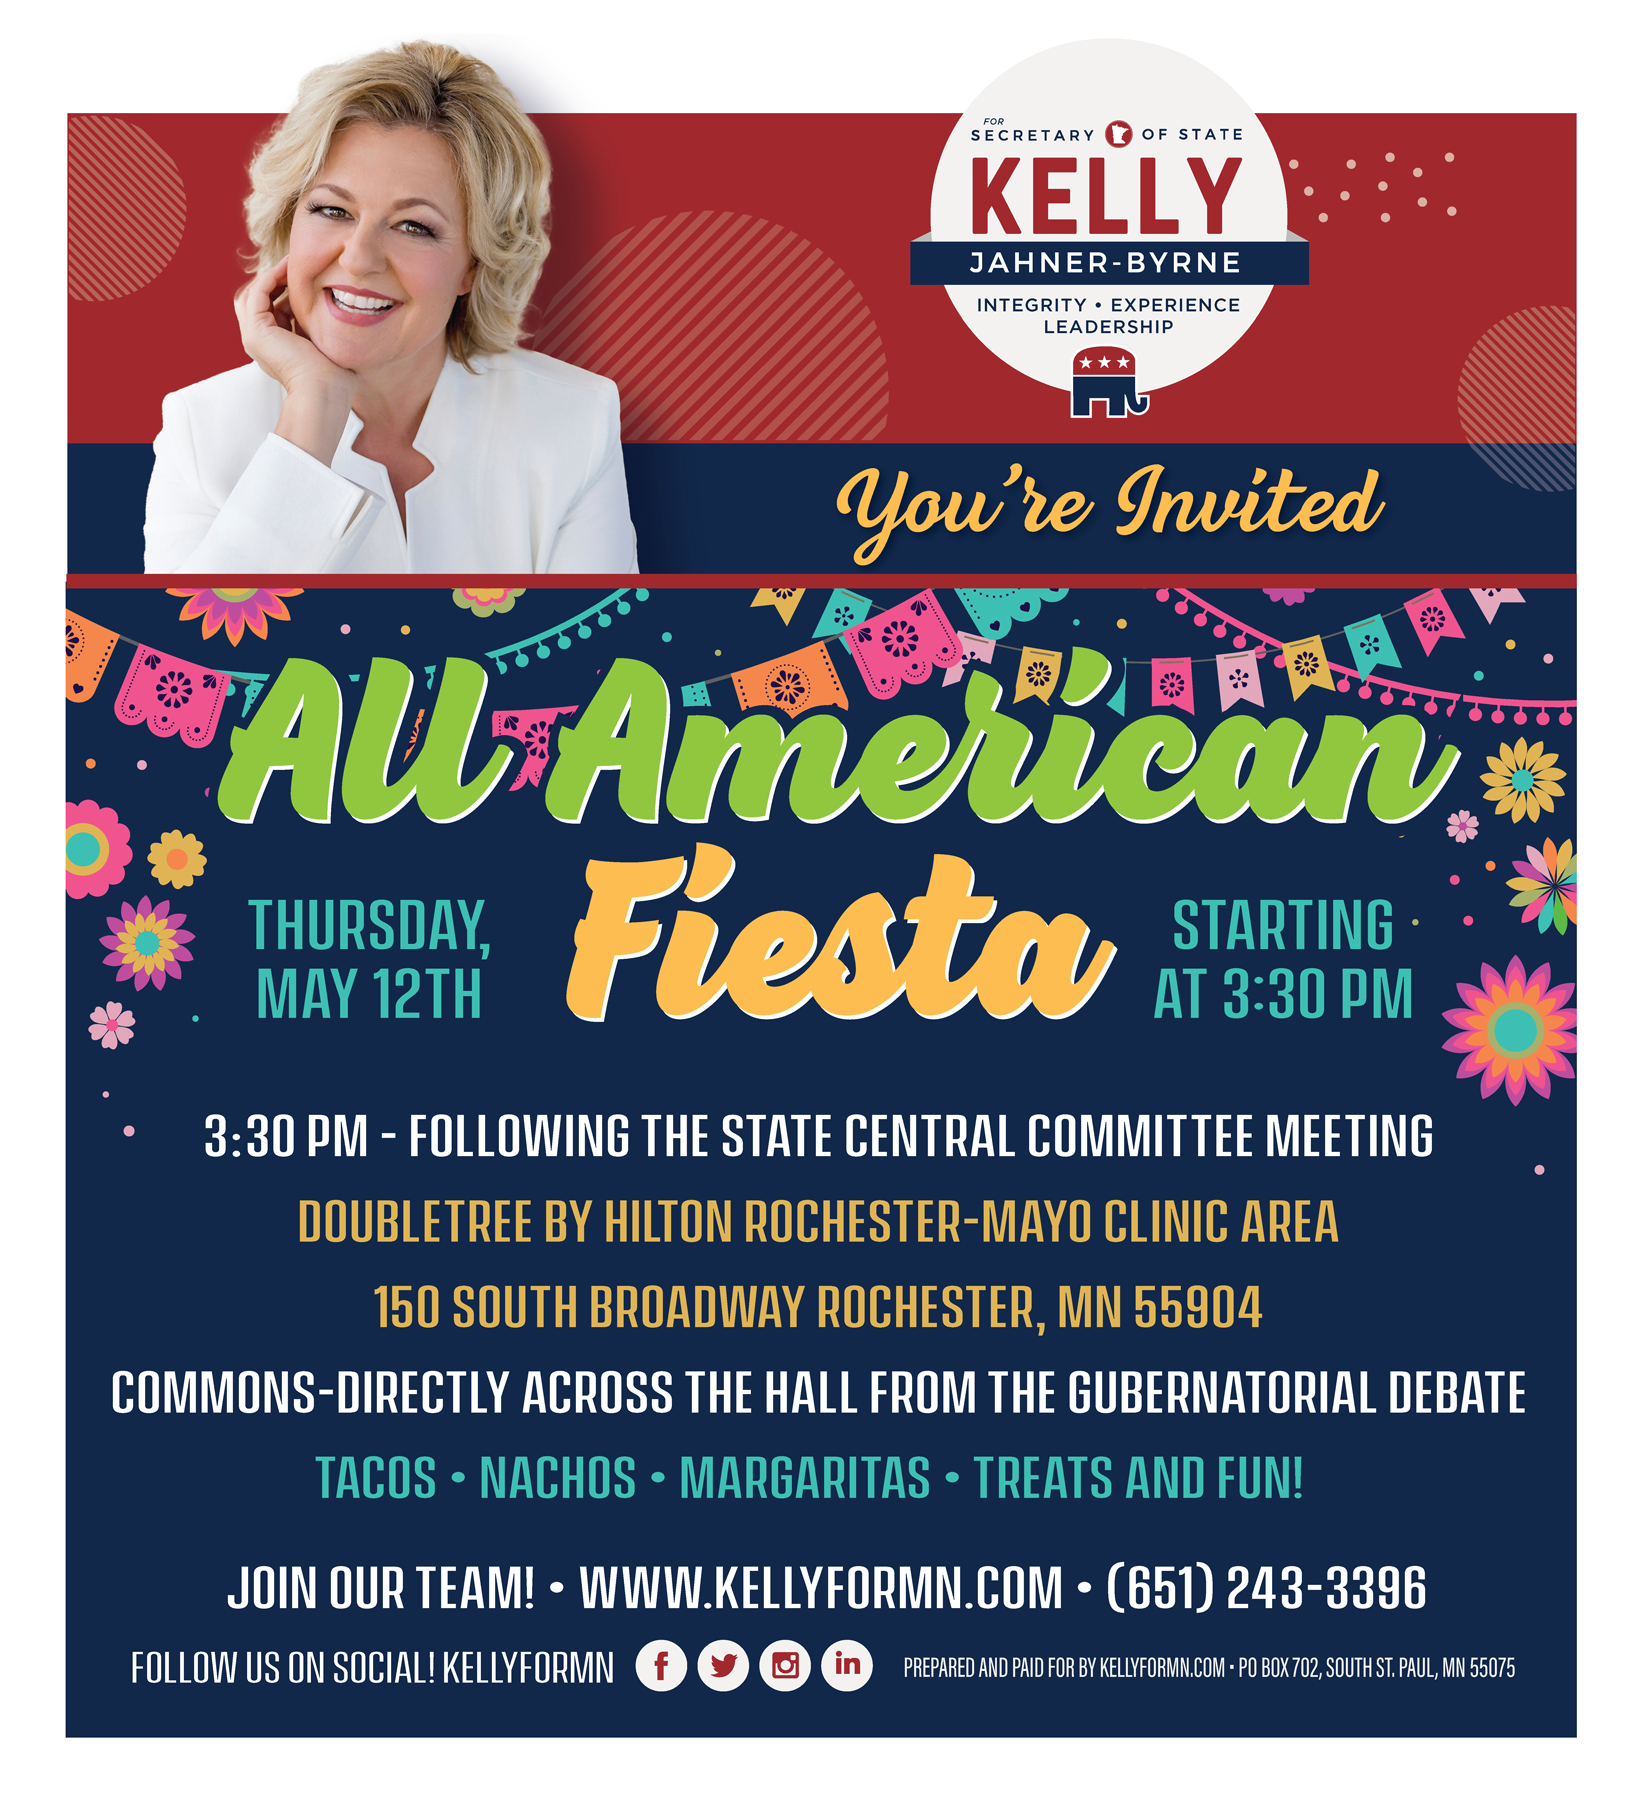 Fiesta with Kelly